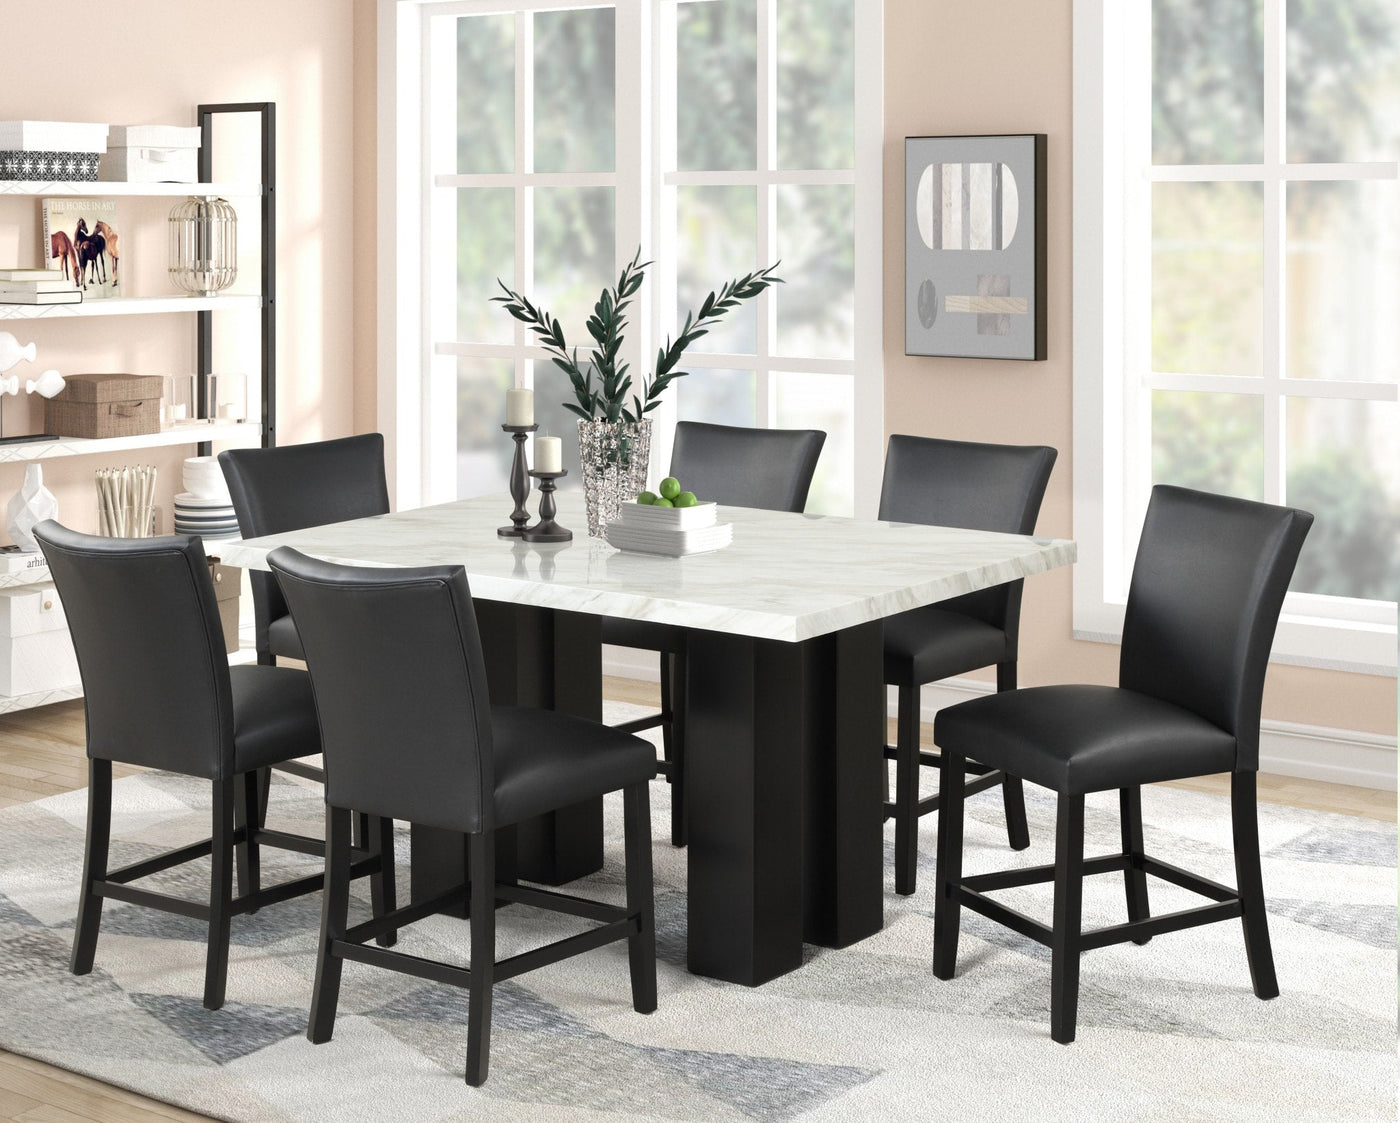 2220 PU - (FAUX MARBLE) PU Counter Height Table + 6 Chair Set